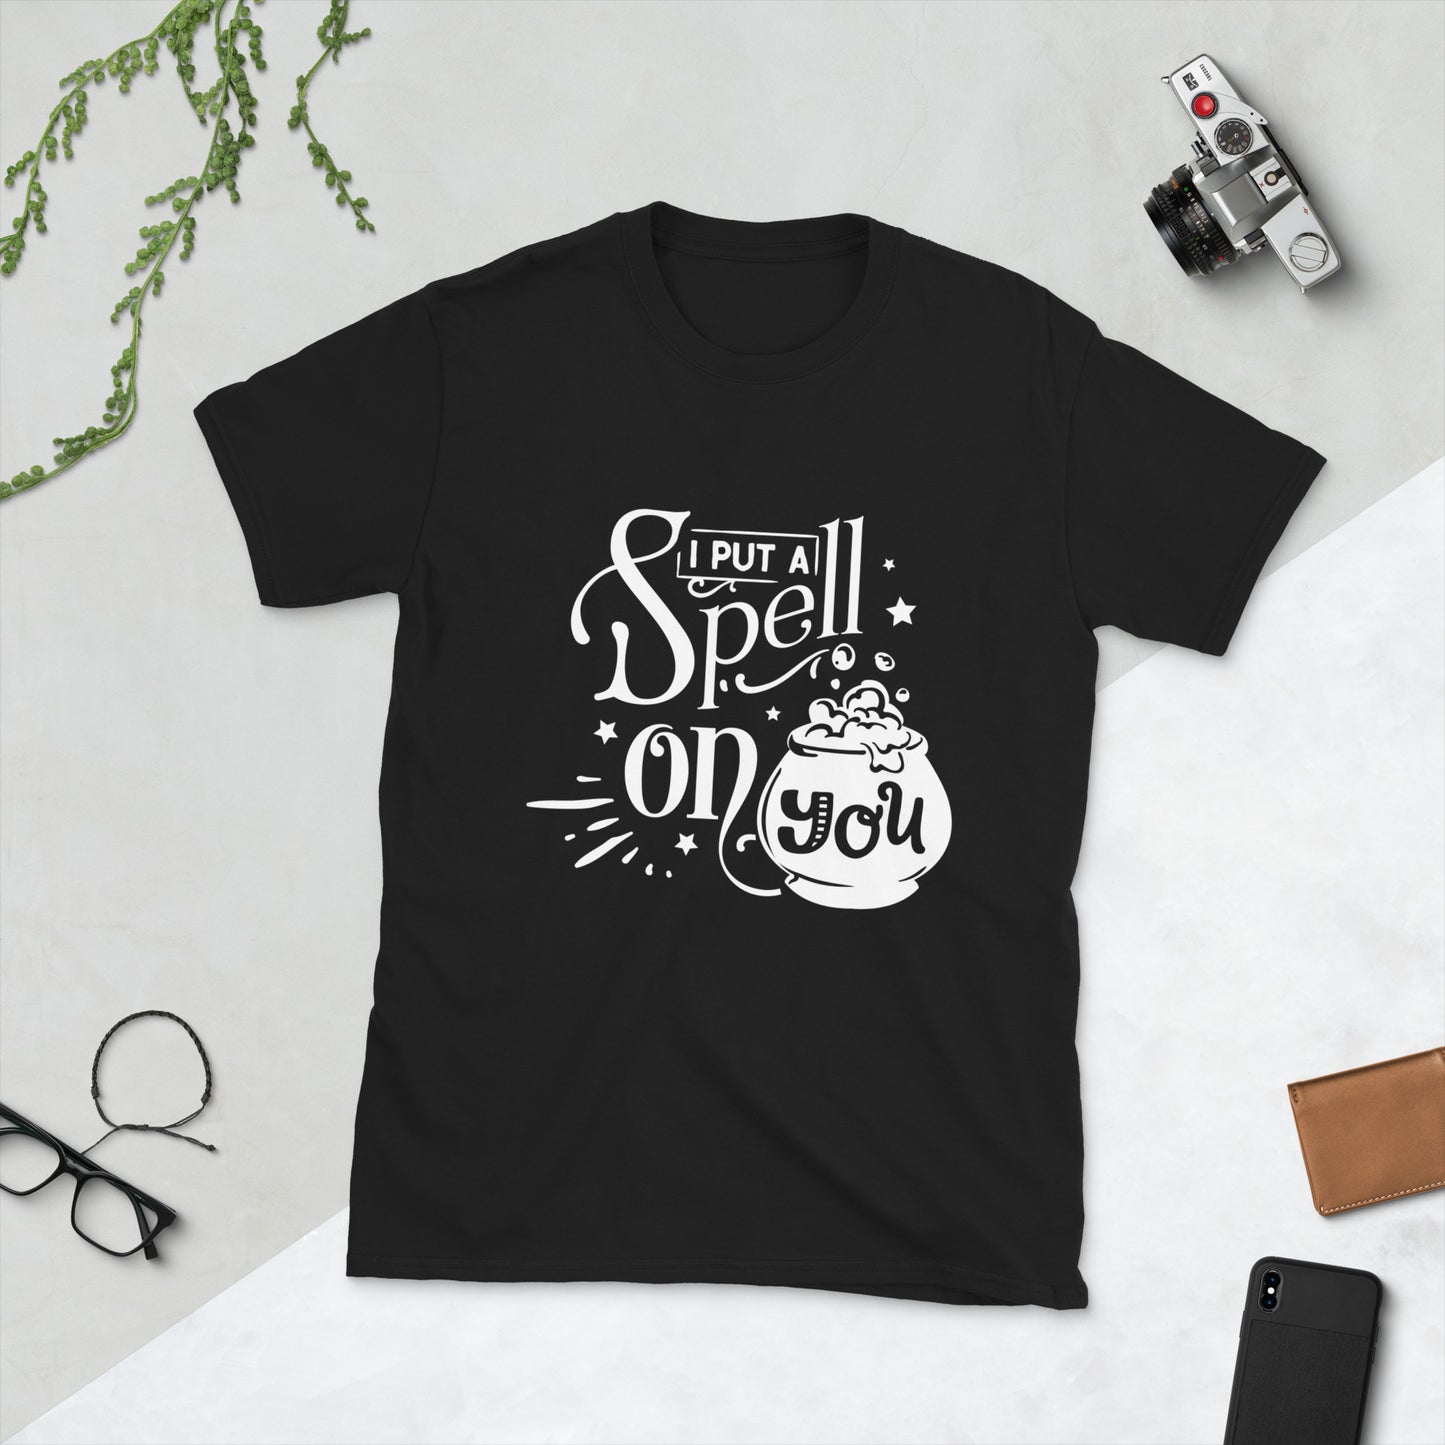 I Put A Spell On You - Short-Sleeve Unisex T-Shirt.